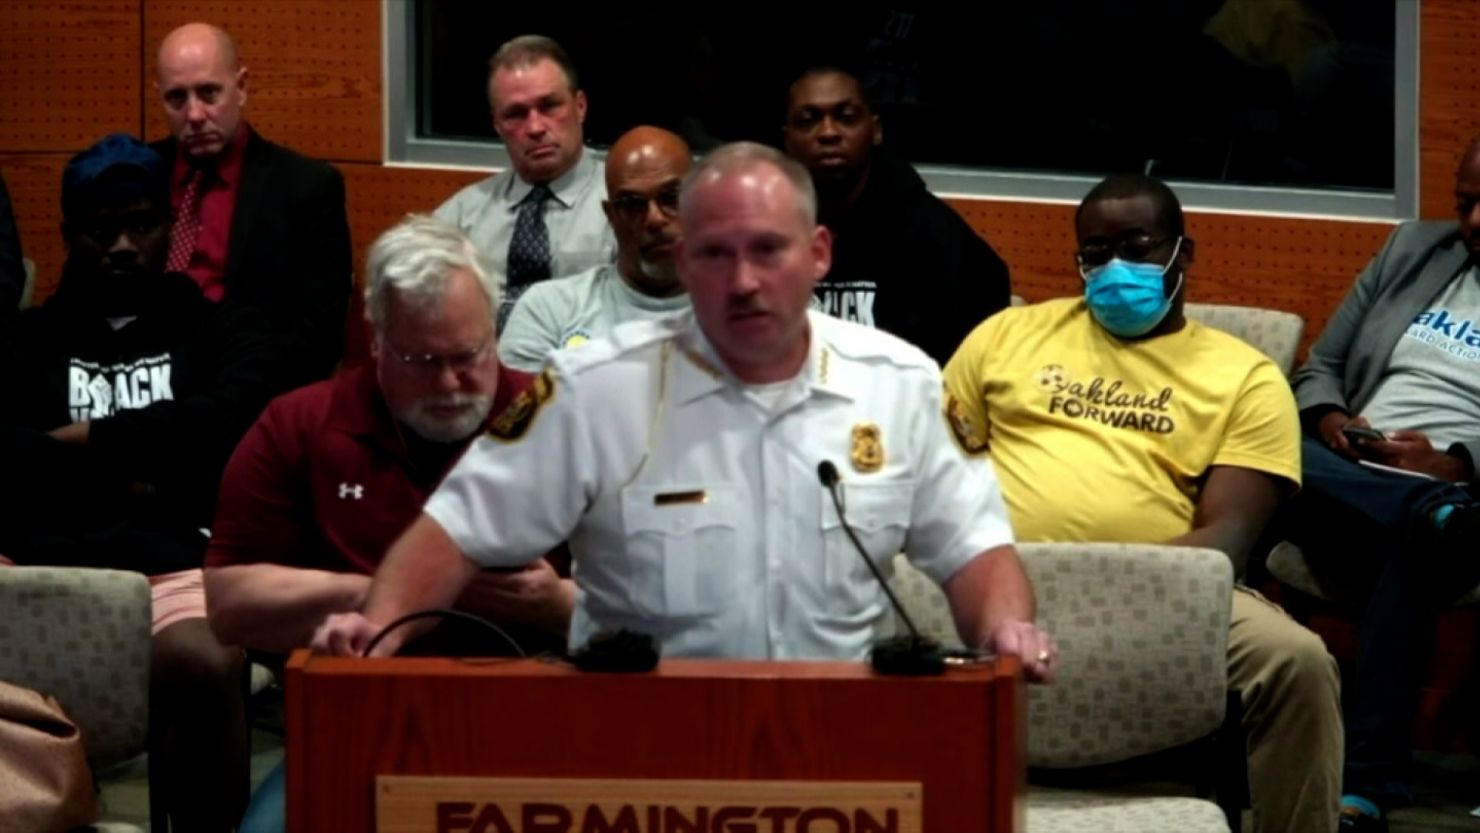 Farmington Hills Police Jeff King apologized for the incident during a city council meeting on June 27. 